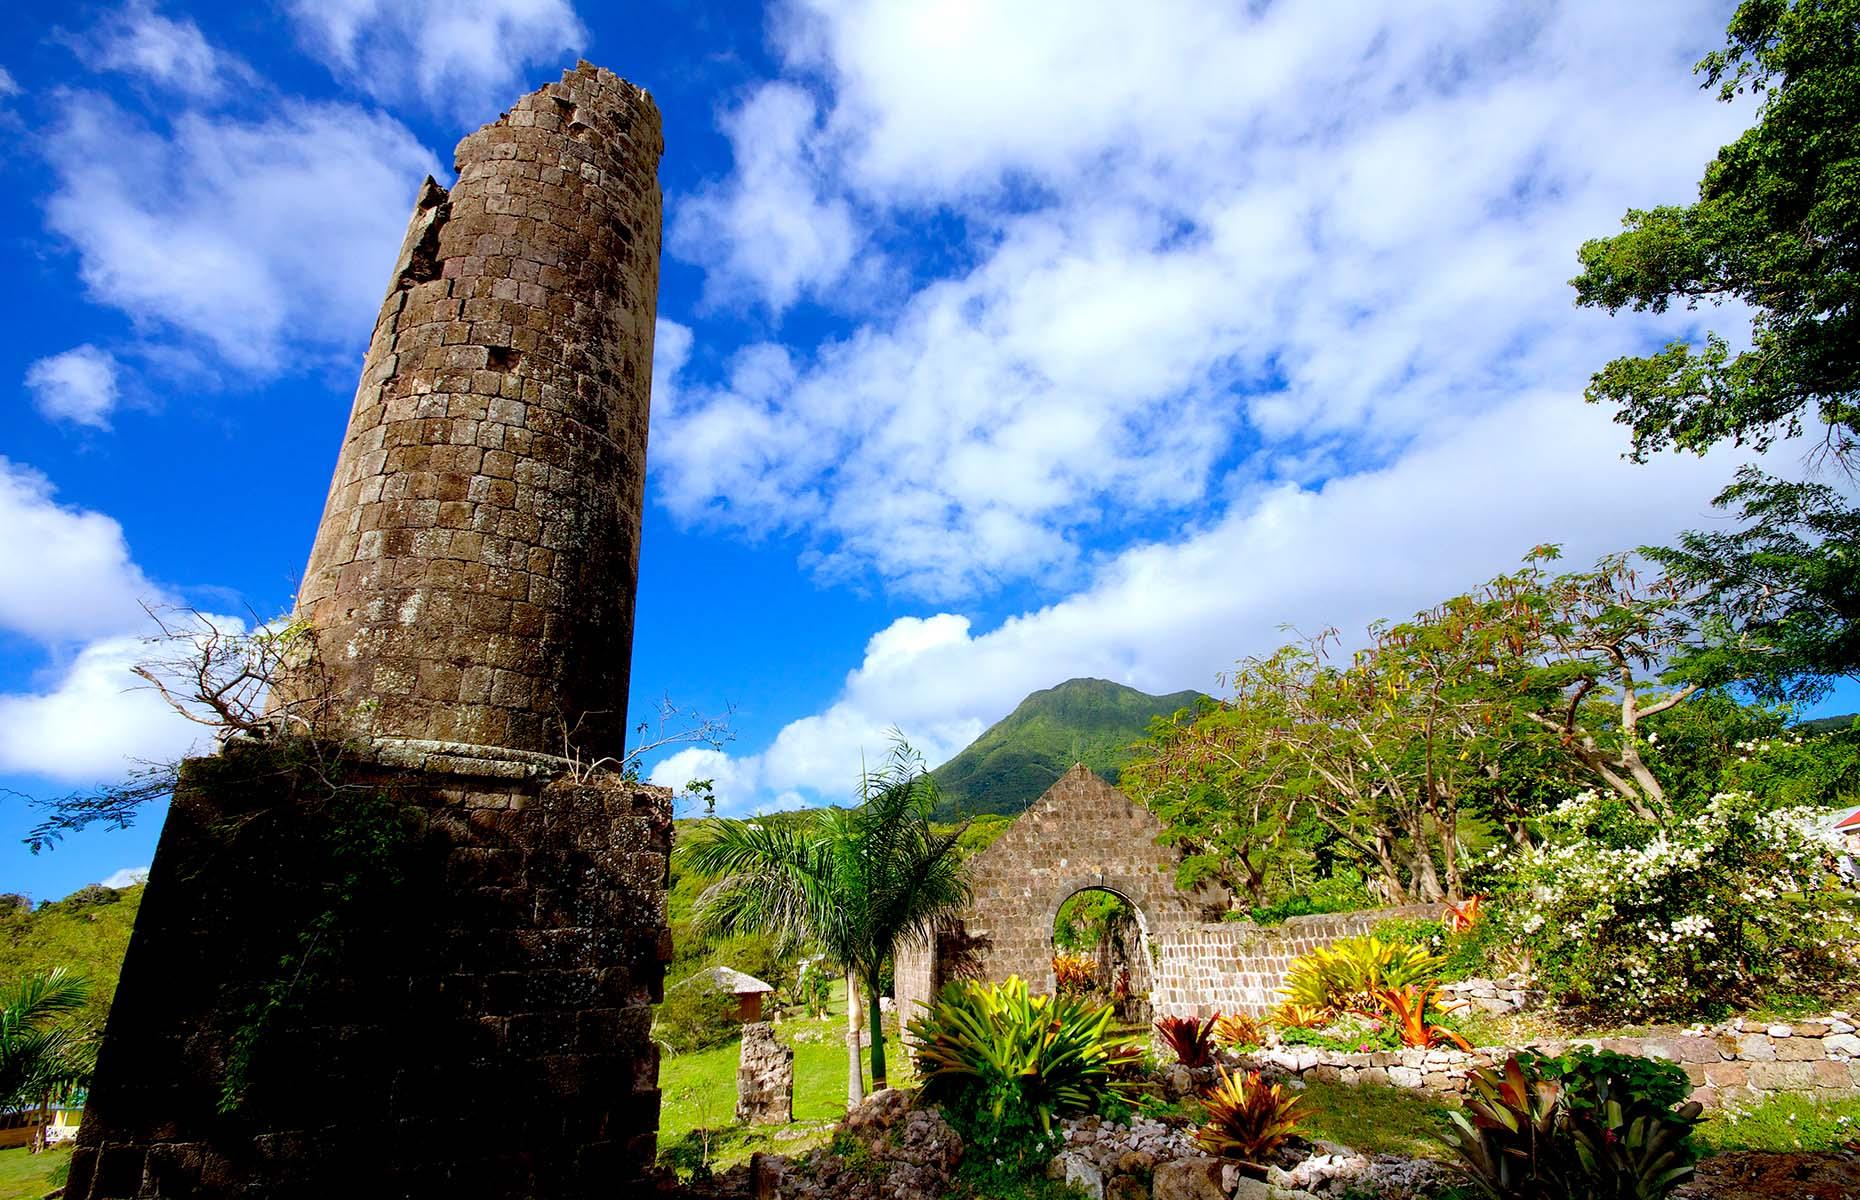 <p>Formerly Fothergill’s Estate – a sugar cane plantation and cotton ginning station – the <a href="https://www.tripadvisor.com/Attraction_Review-g147377-d3531964-Reviews-Nevisian_Heritage_Village_at_Fothergills_Estate-Nevis_St_Kitts_and_Nevis.html">Nevisian Heritage Village</a> is now an open-air museum designed to teach visitors about Nevisian social history, from Carib times to the present day. Exhibits include replica slave houses, a rum shop and a blacksmith’s shop, all of which come complete with period furnishings and offer an insight into the hardship that enslaved Africans had to endure during colonial times. When you’ve finished wandering the buildings, there’s a fabulous on-site café where you can grab a bite to eat.</p>